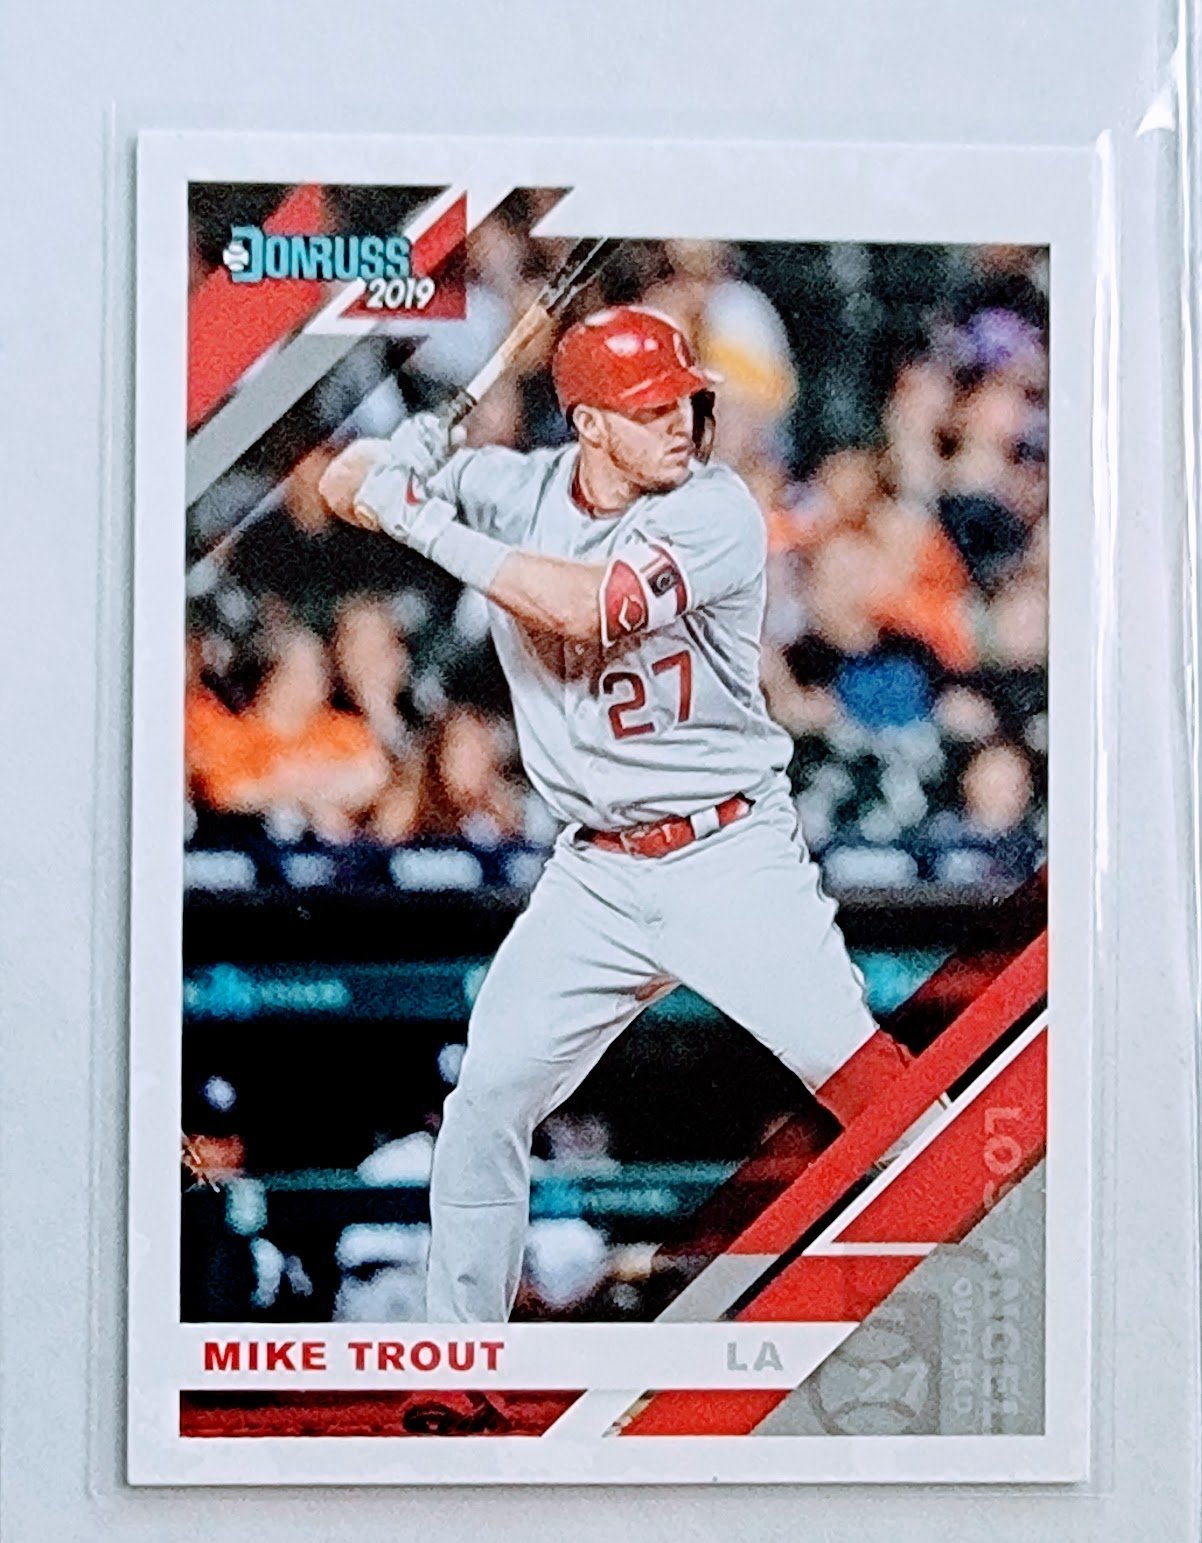 2019 Donruss Mike Trout Angels Baseball Card TPTV simple Xclusive Collectibles   